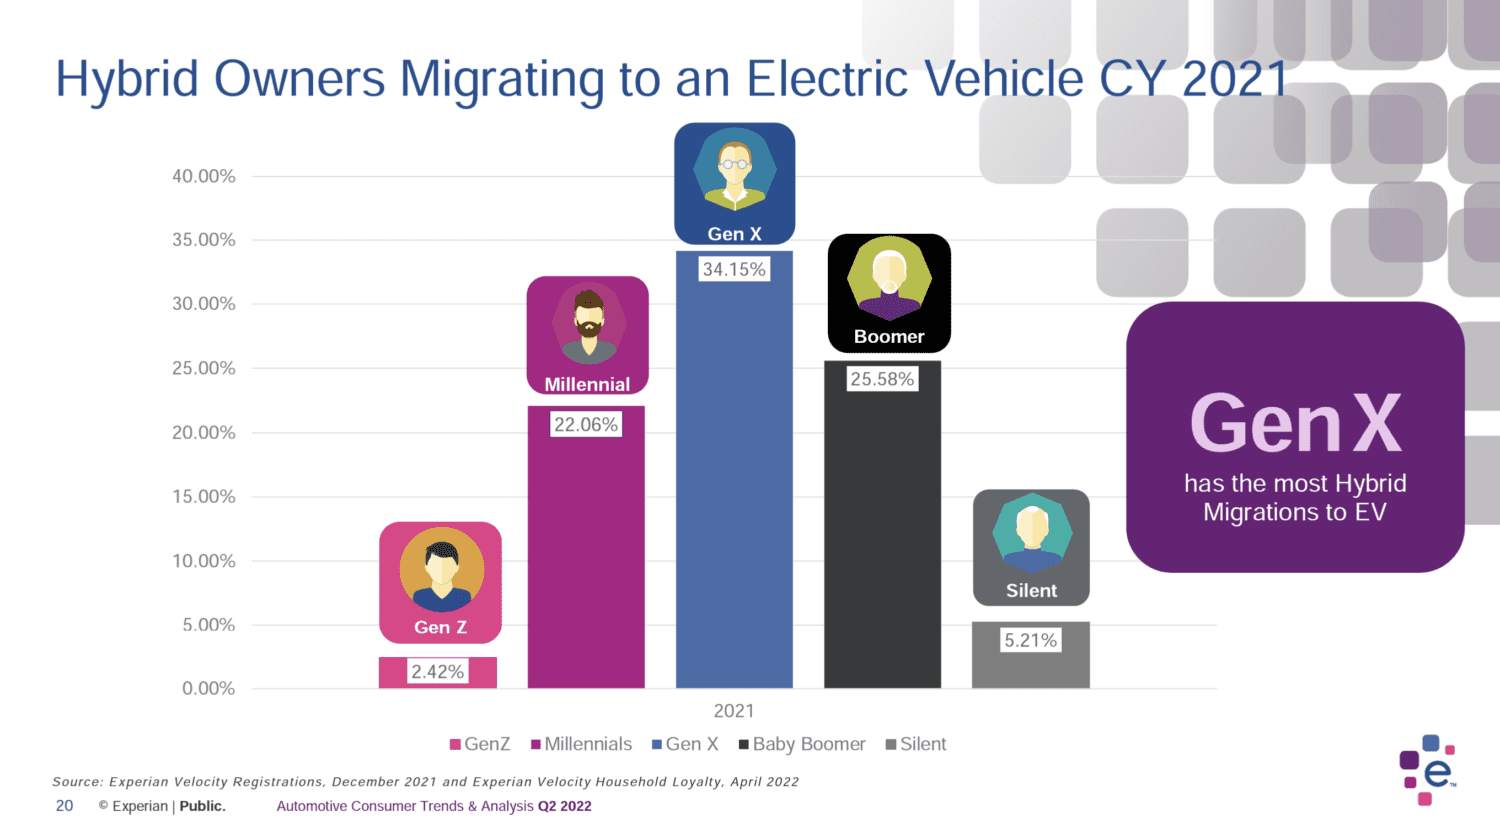 Experian Automotive Consumer Trends & Analysis Q2 2022: Electric Vehicles